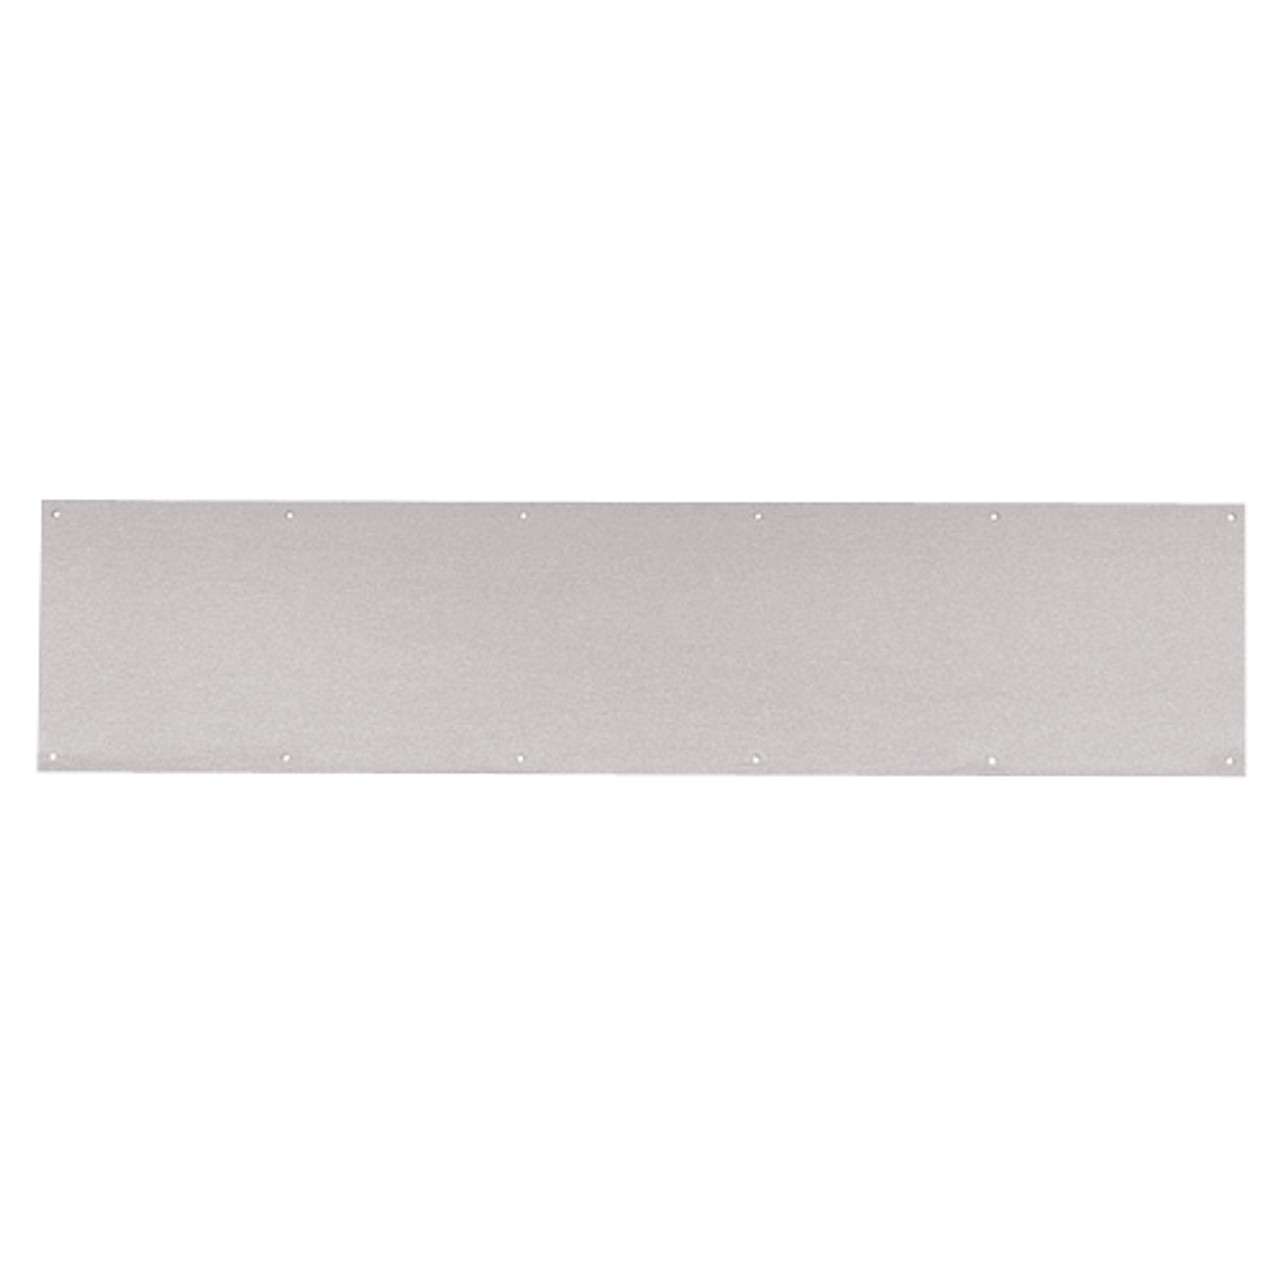 8400-US32D-34x34.5-B-CS Ives 8400 Series Protection Plate in Satin Stainless Steel